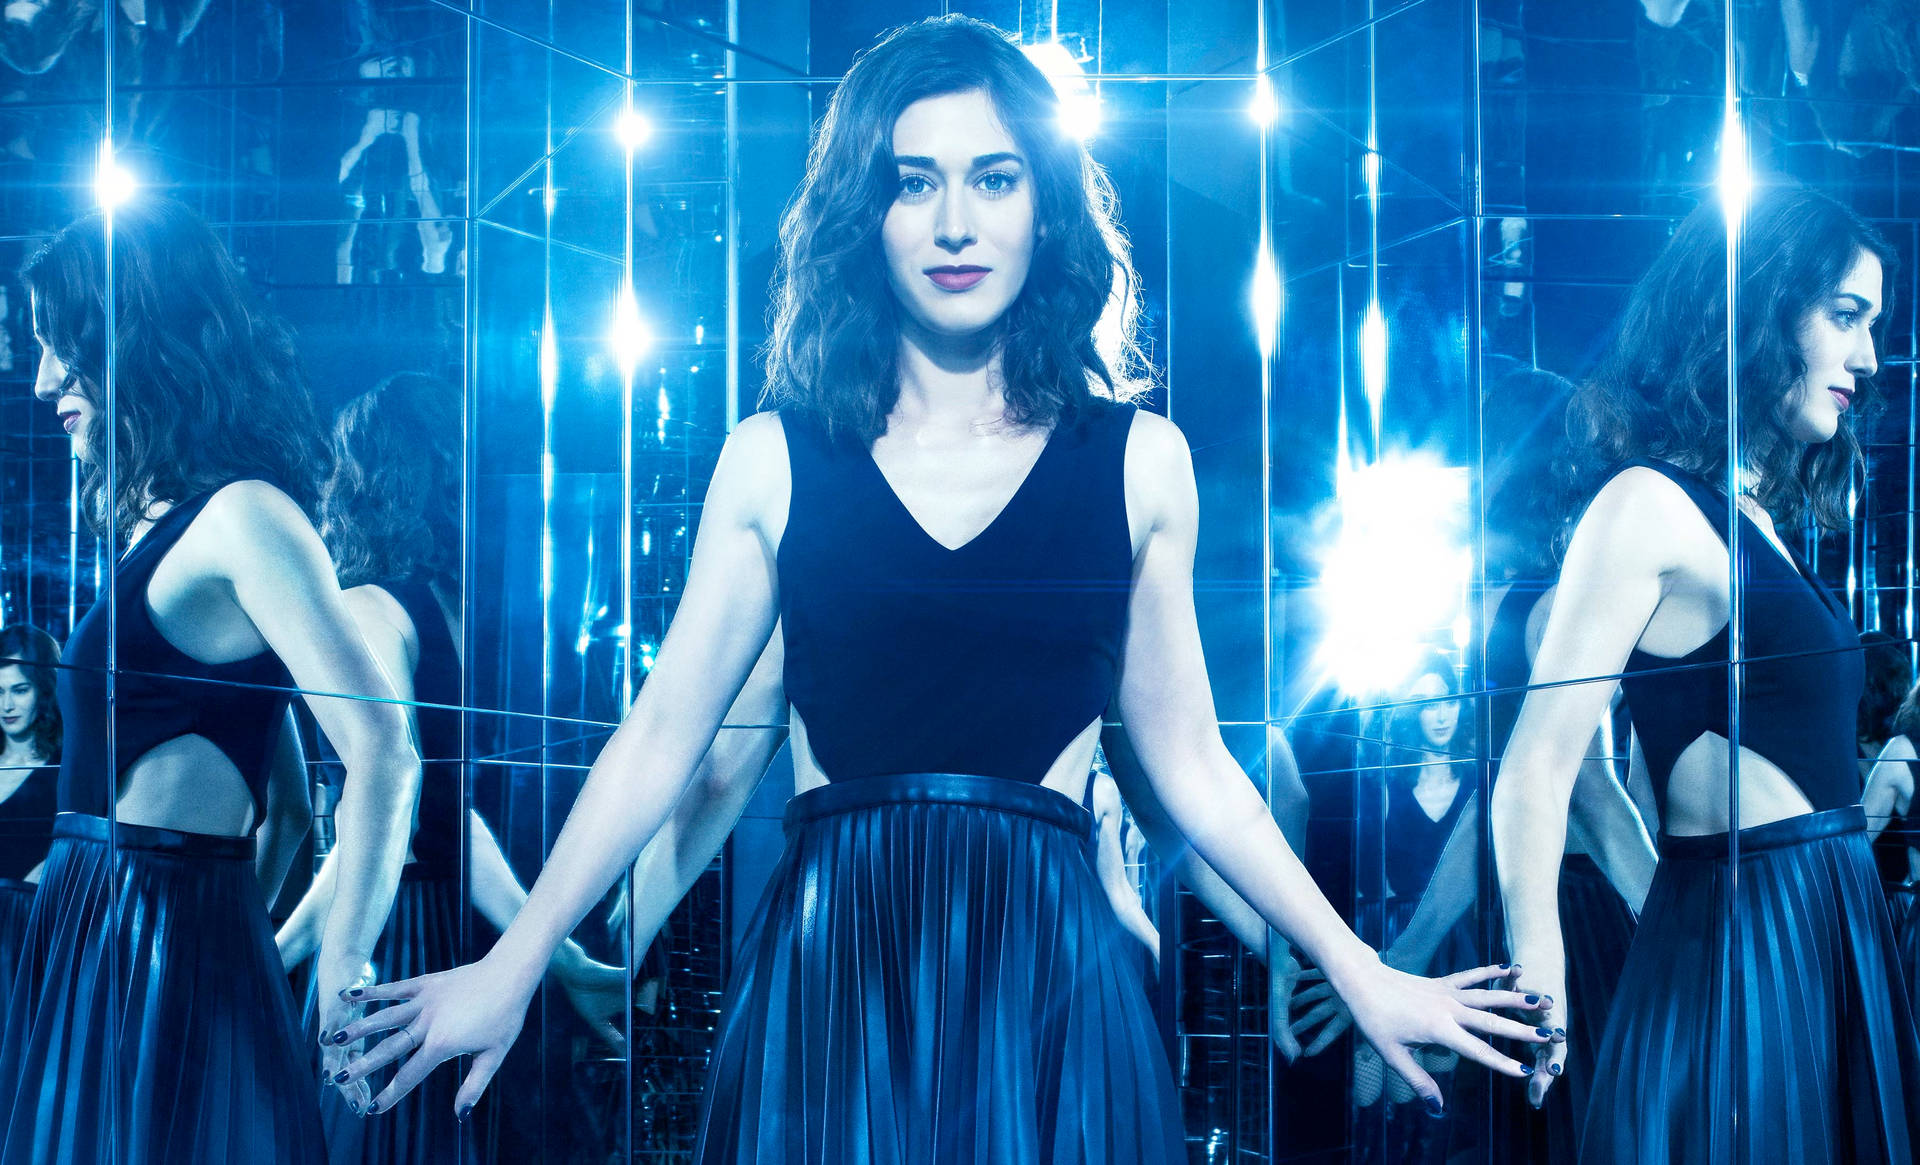 Lizzycaplan In Now You See Me 2 Translates To 